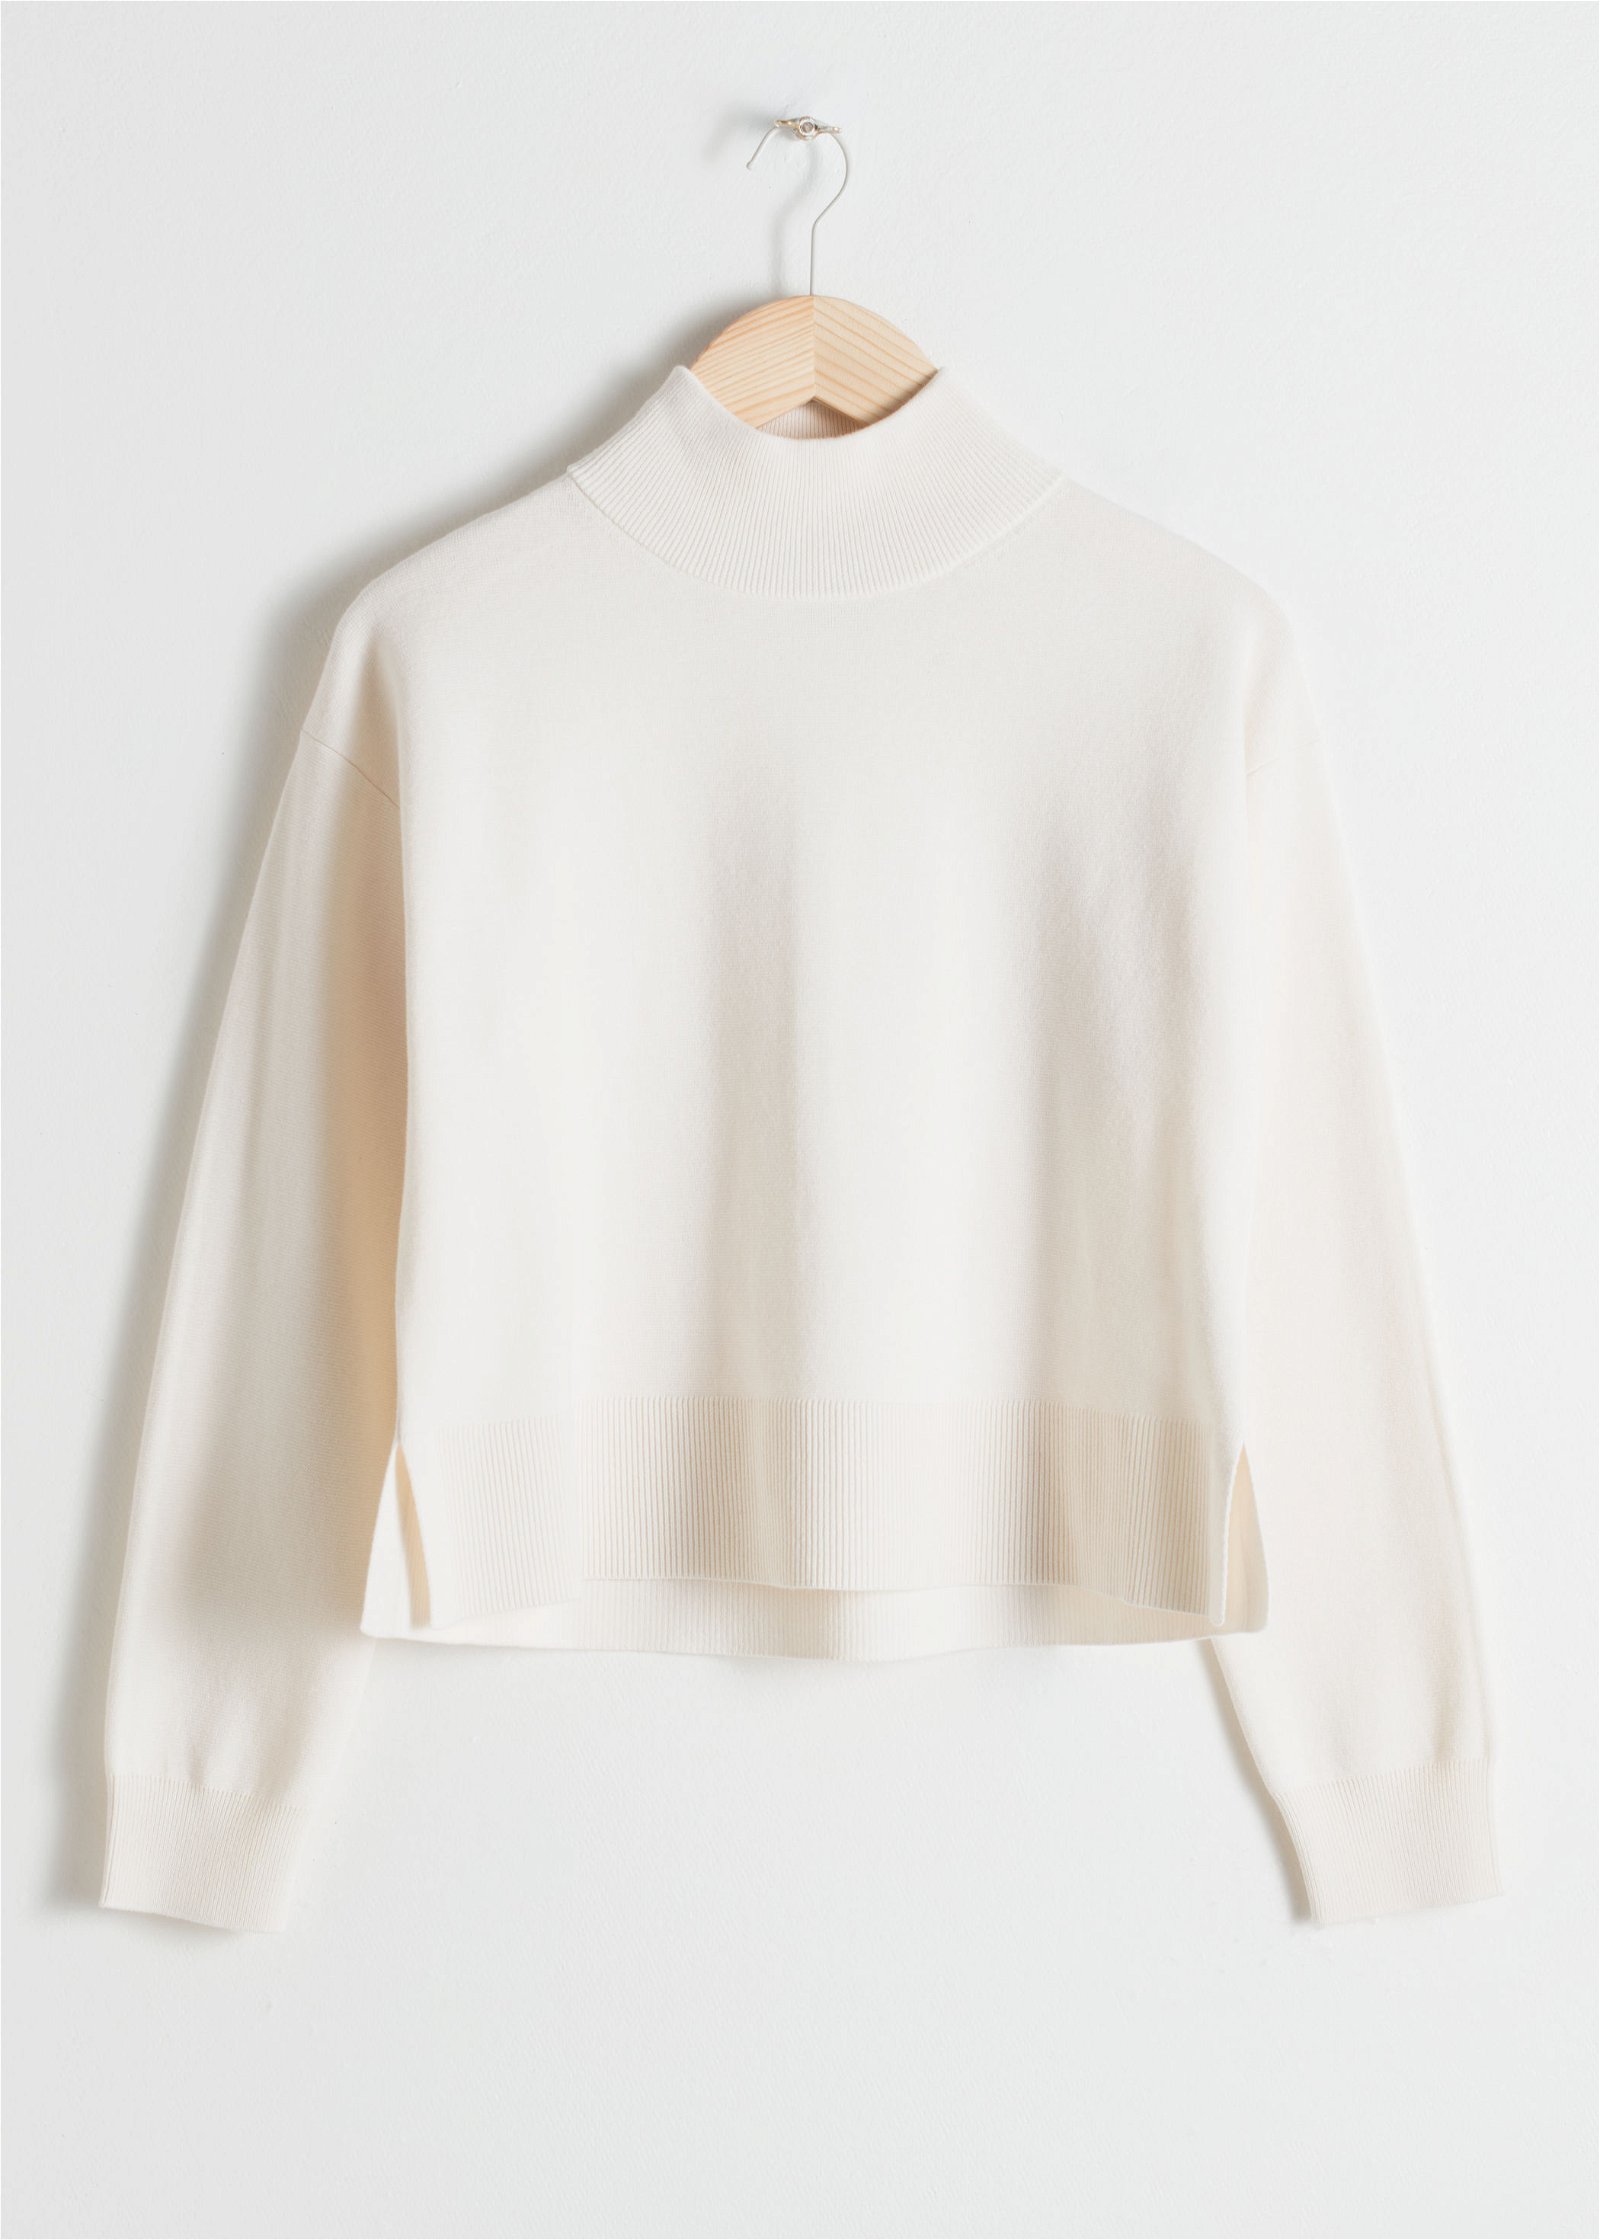  Other Stories mock neck sweater in off white